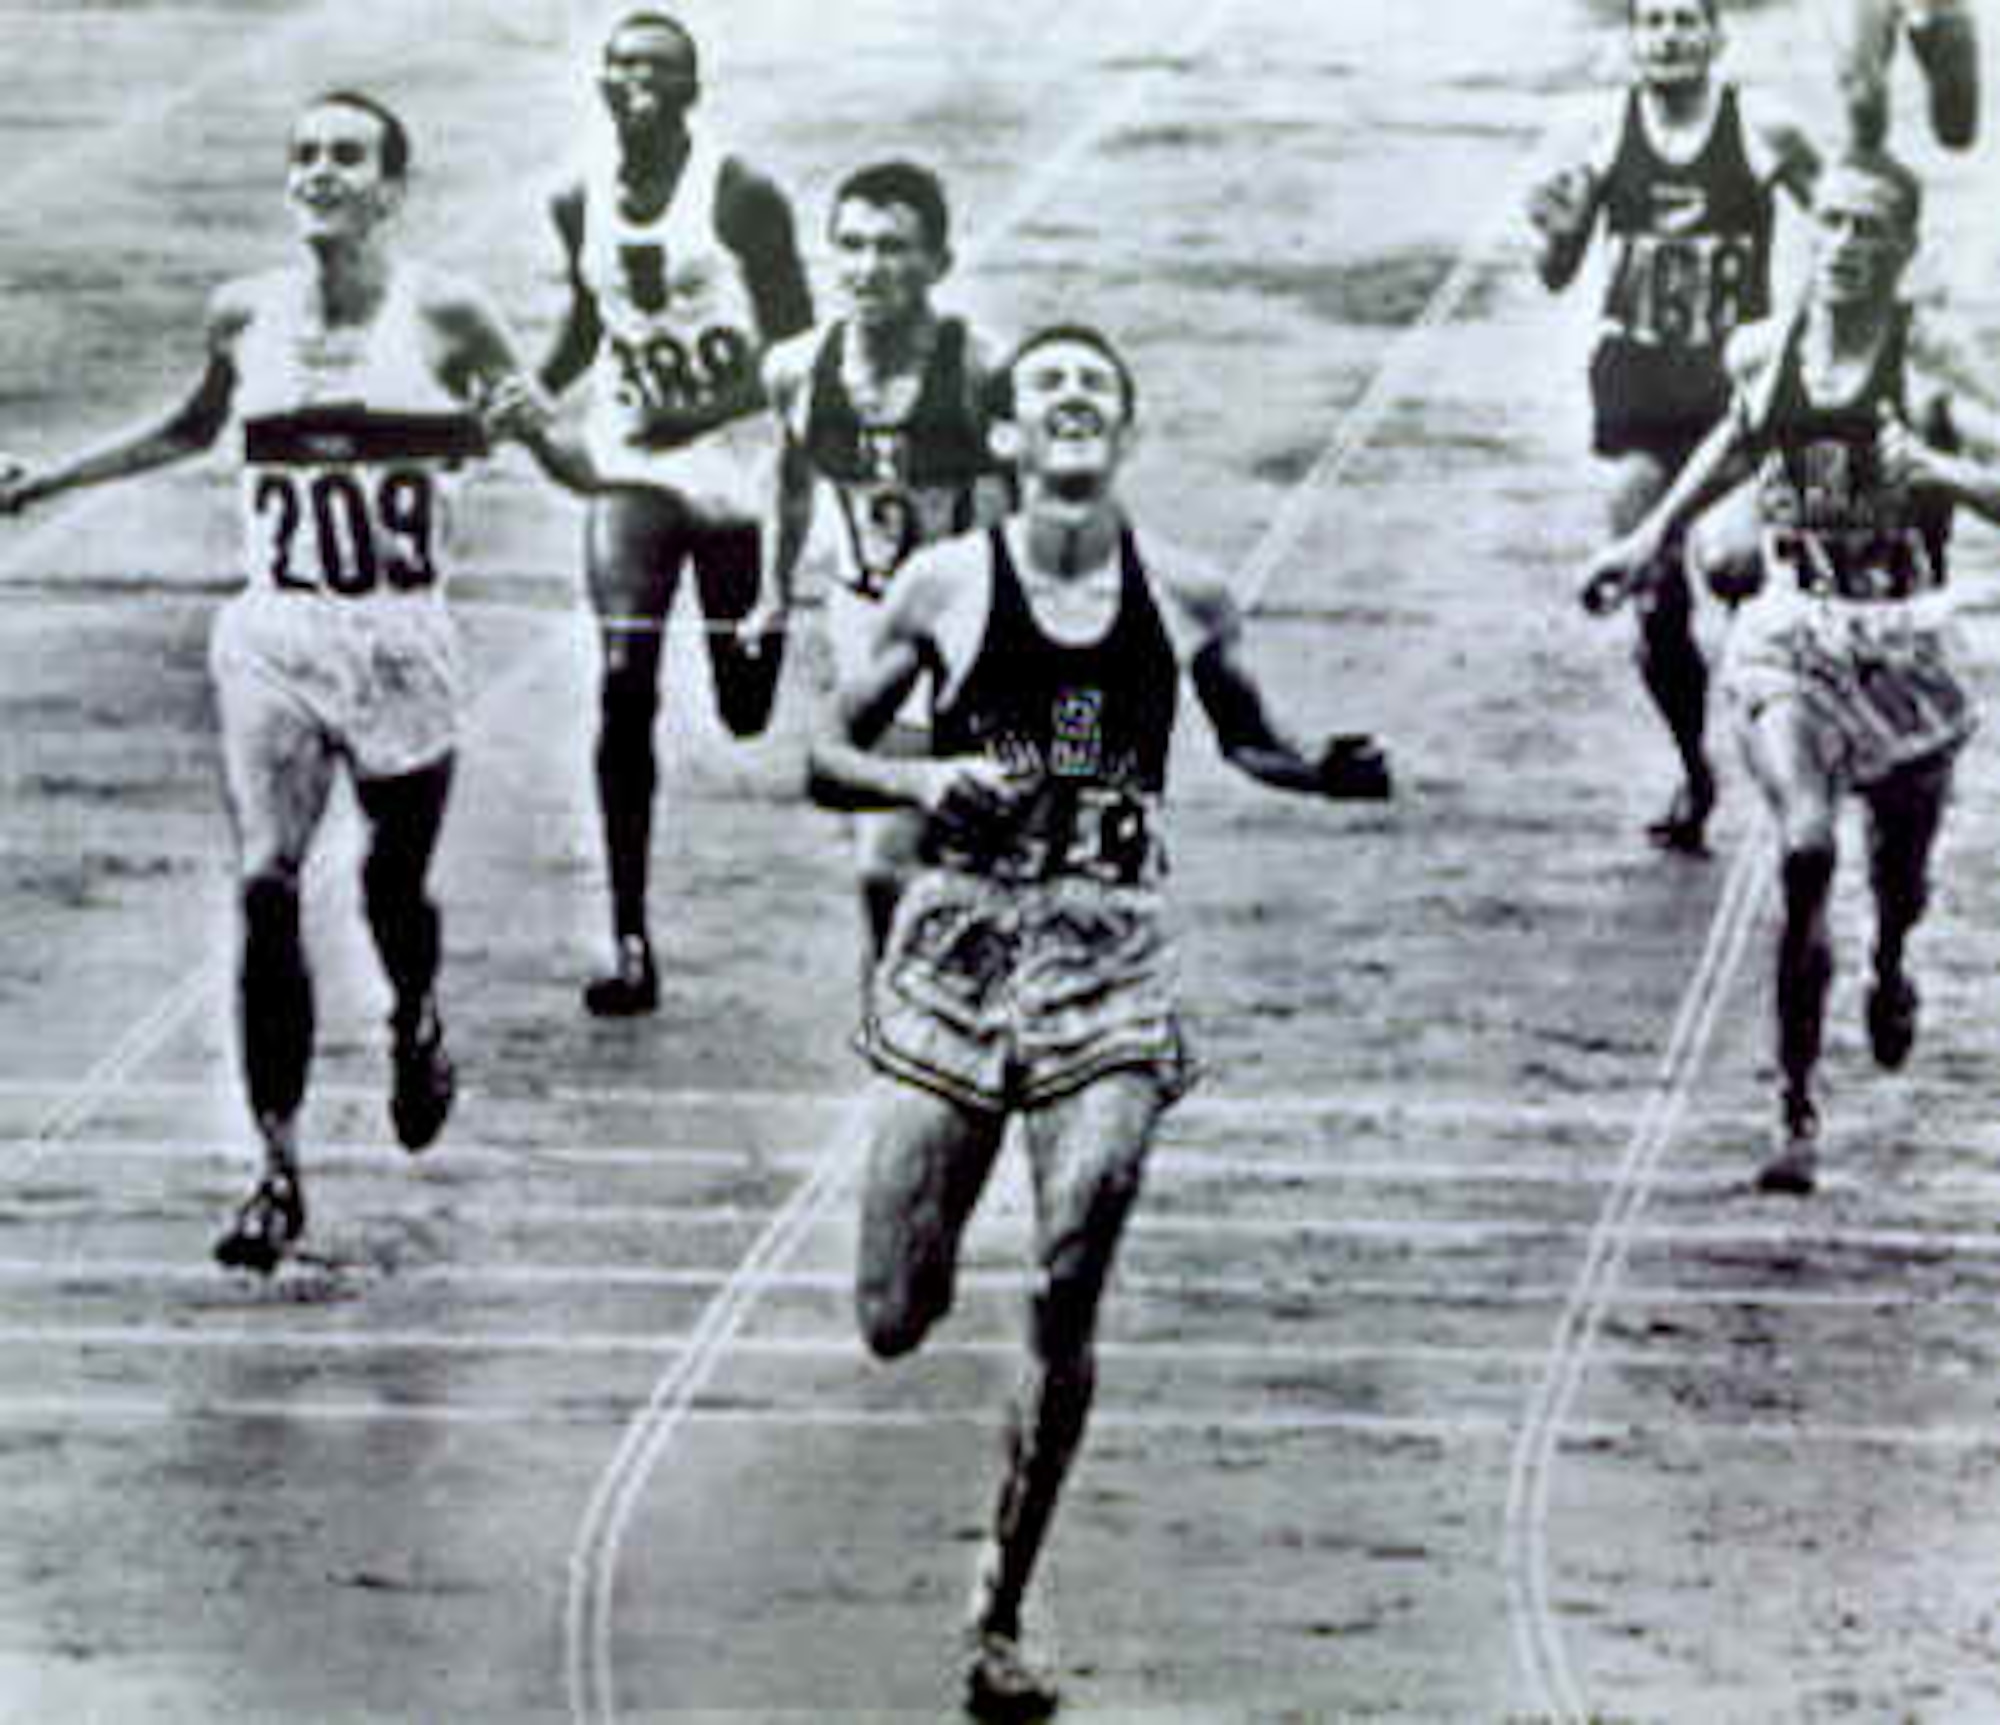 Bob Schul crossing the finish line at the 1964 Olympics in Tokyo, Japan.  Schul is the first and only Team USA runner to win the 5,000 meters at the Olympic games.  Schul is scheduled to be the second guest speaker at the 23rd Air Force Marathon. (Contributed photo)